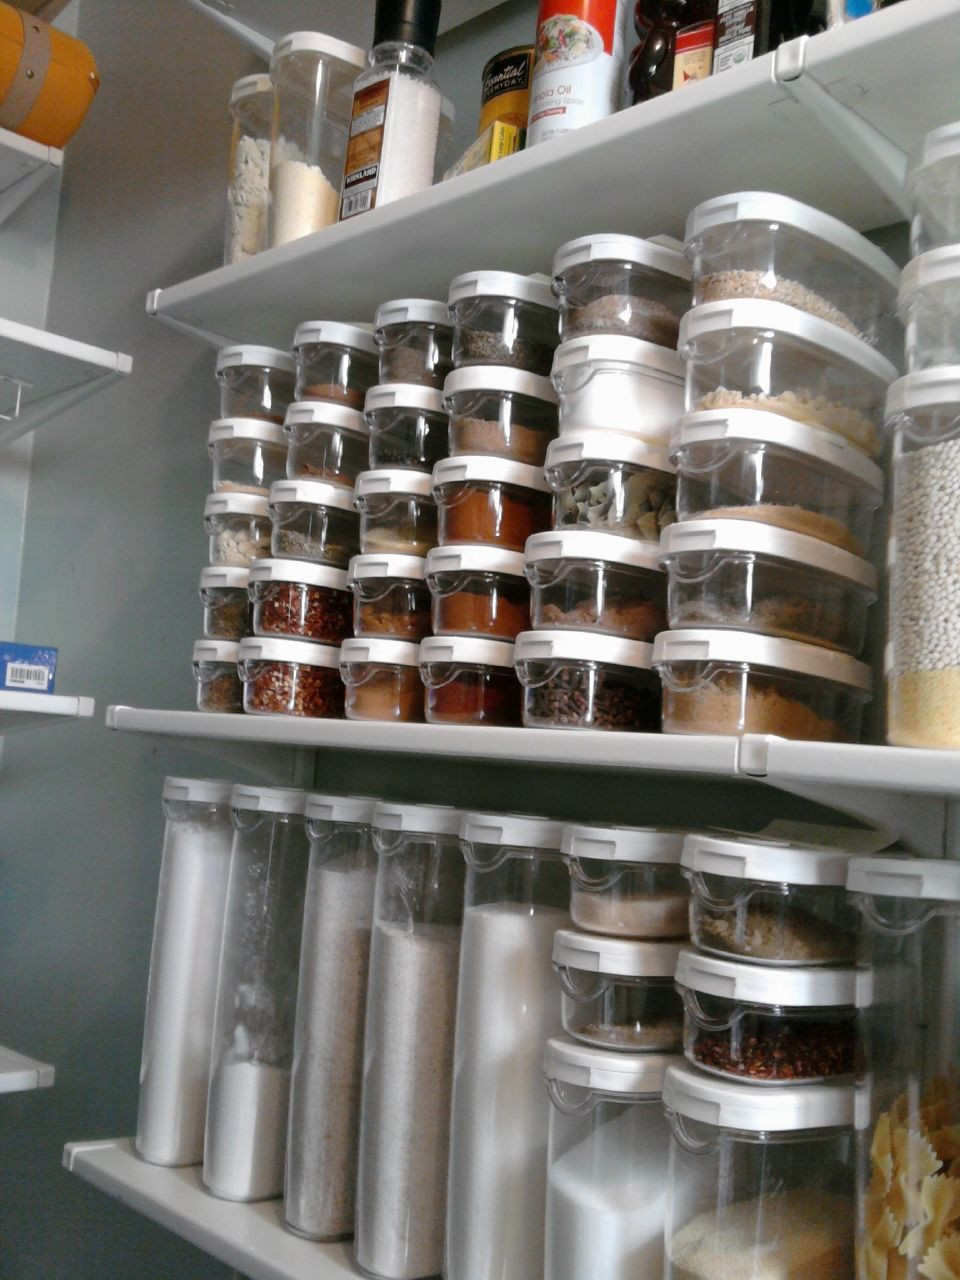 Ikea Kitchen Storage Containers
 Spring Cleaning and Organizing The Pantry Ikea Has The